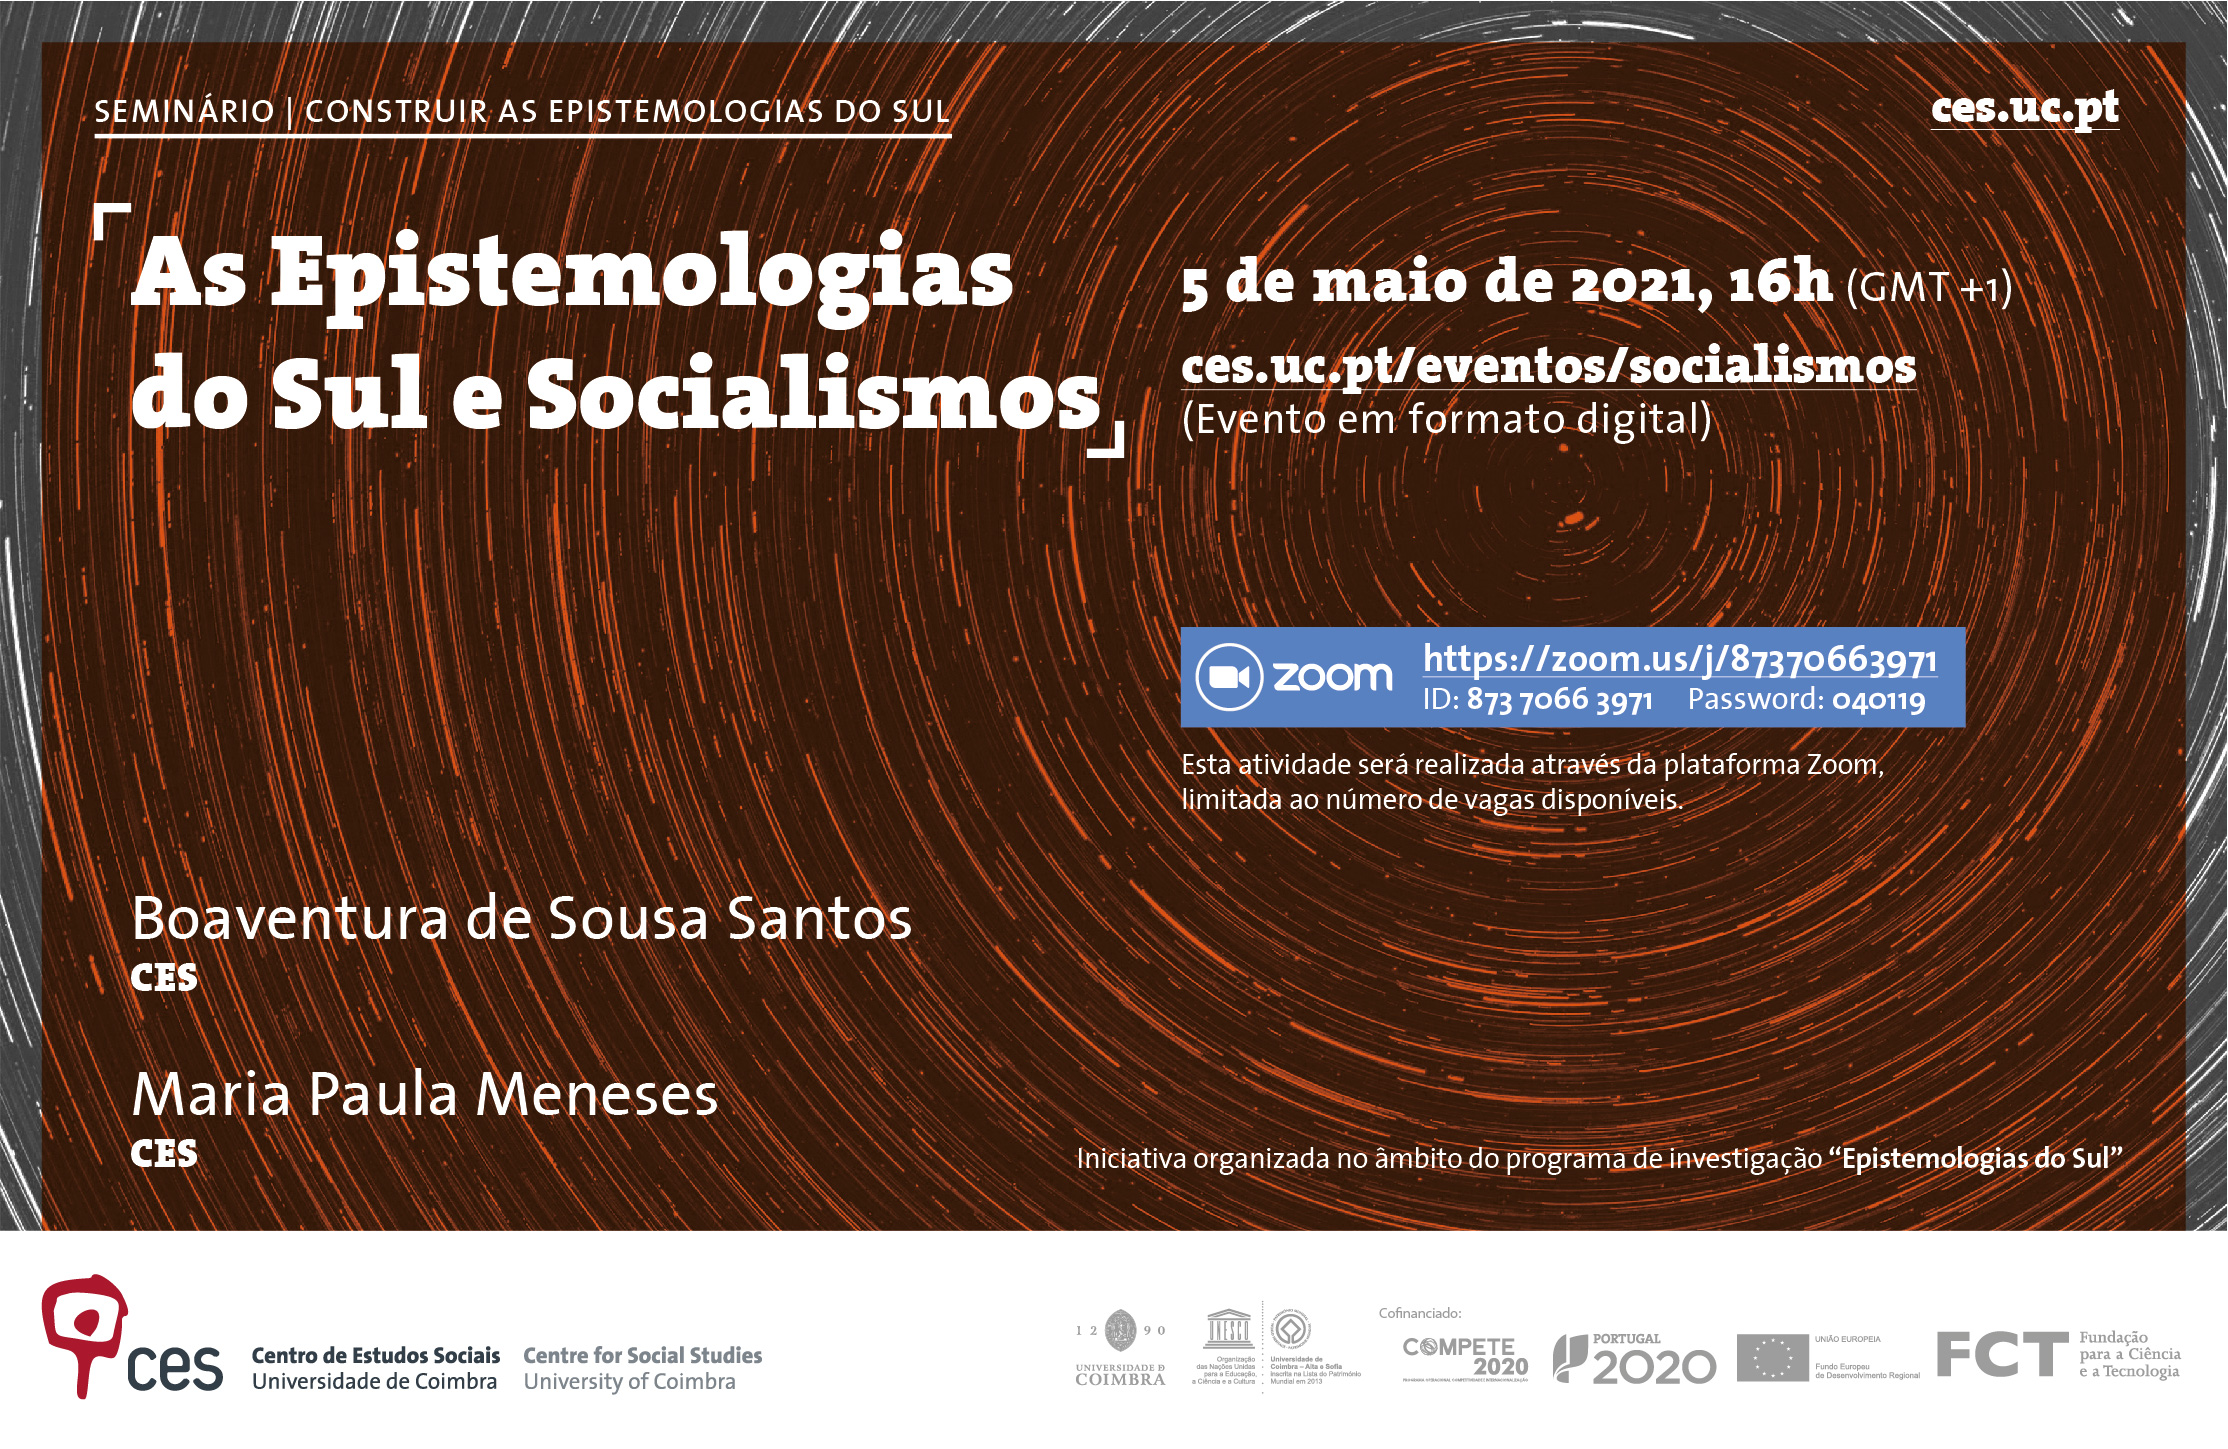 Epistemologies of the South and Socialisms<span id="edit_33588"><script>$(function() { $('#edit_33588').load( "/myces/user/editobj.php?tipo=evento&id=33588" ); });</script></span>